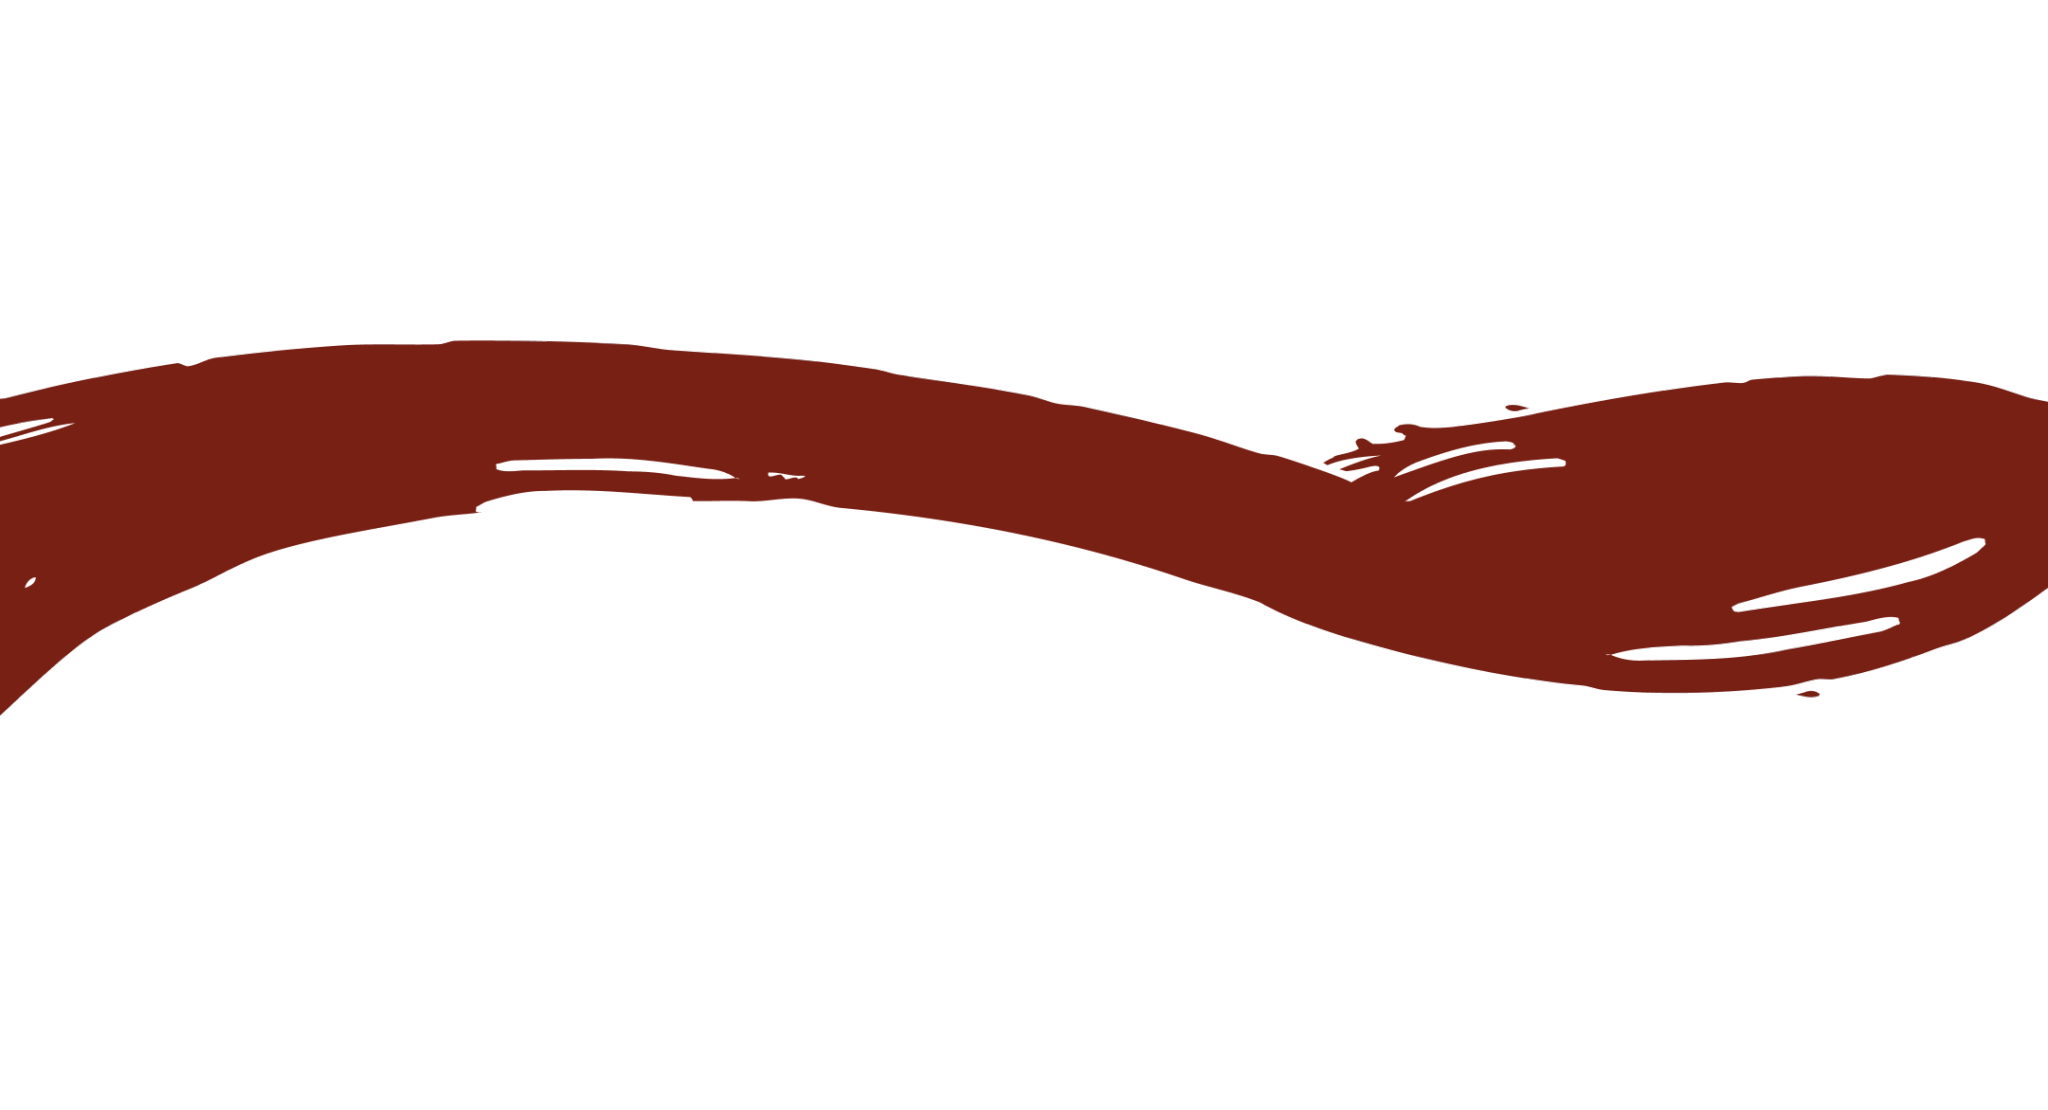 Welcome to the saucy side